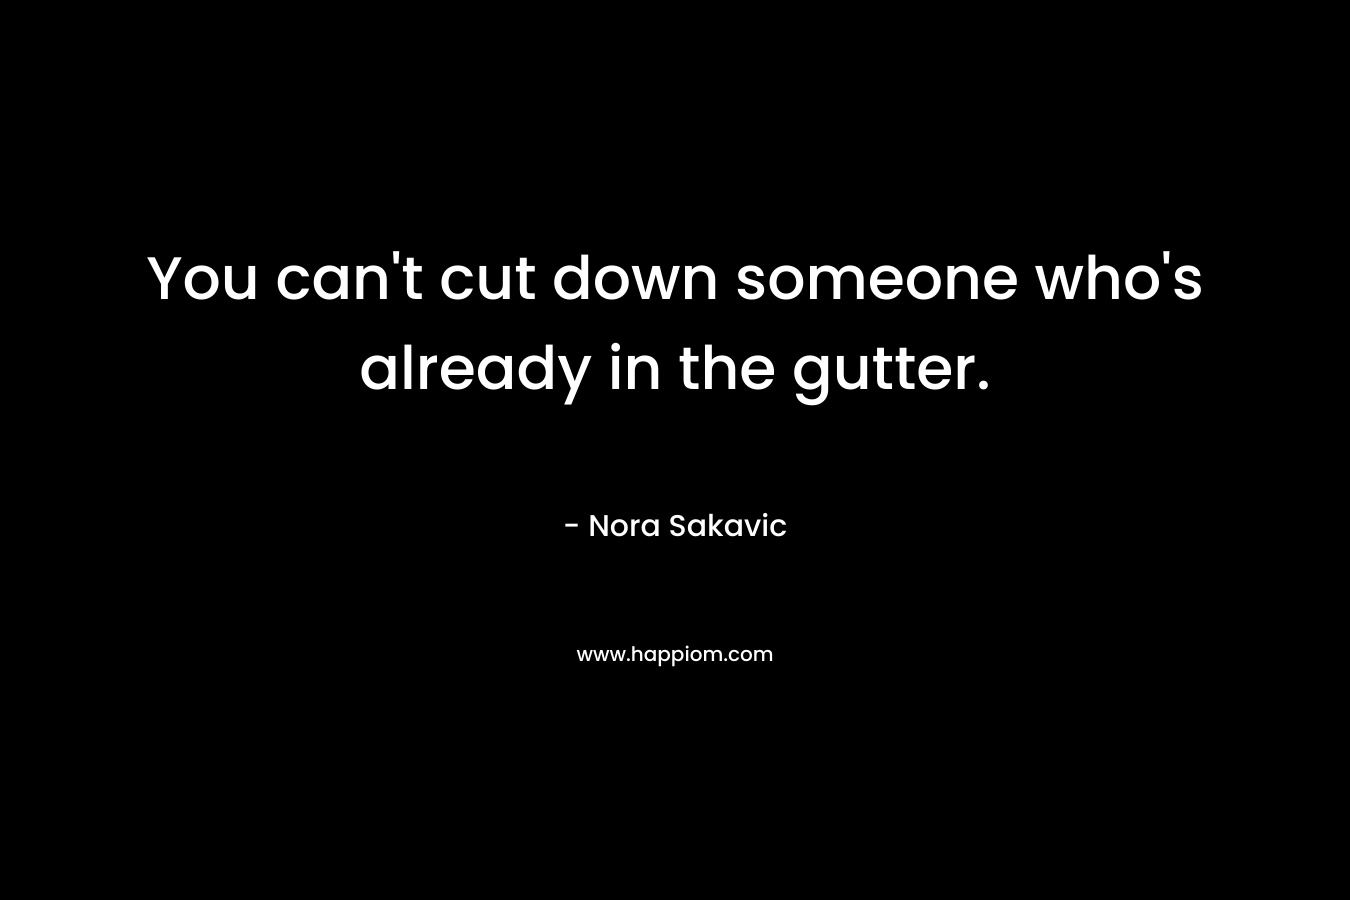 You can’t cut down someone who’s already in the gutter. – Nora Sakavic